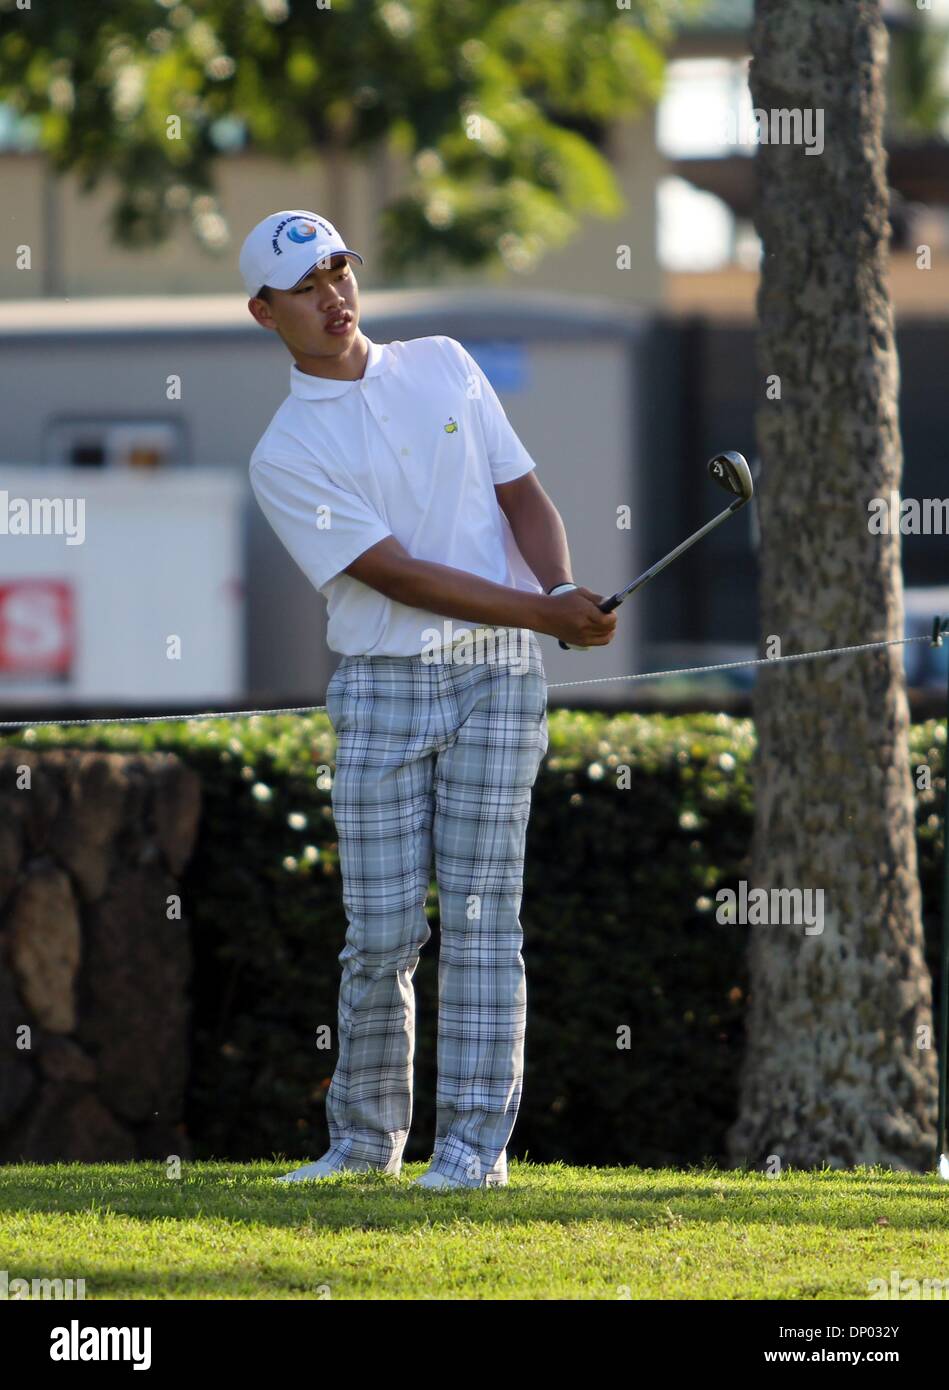 Honolulu, HI, USA. 5th Jan, 2014. January 5, 2014 - Chinese teen sensation Guan Tianlang during a practice day for the Sony Open at the Waialae Country Club in Honolulu, HI. Credit:  csm/Alamy Live News Stock Photo